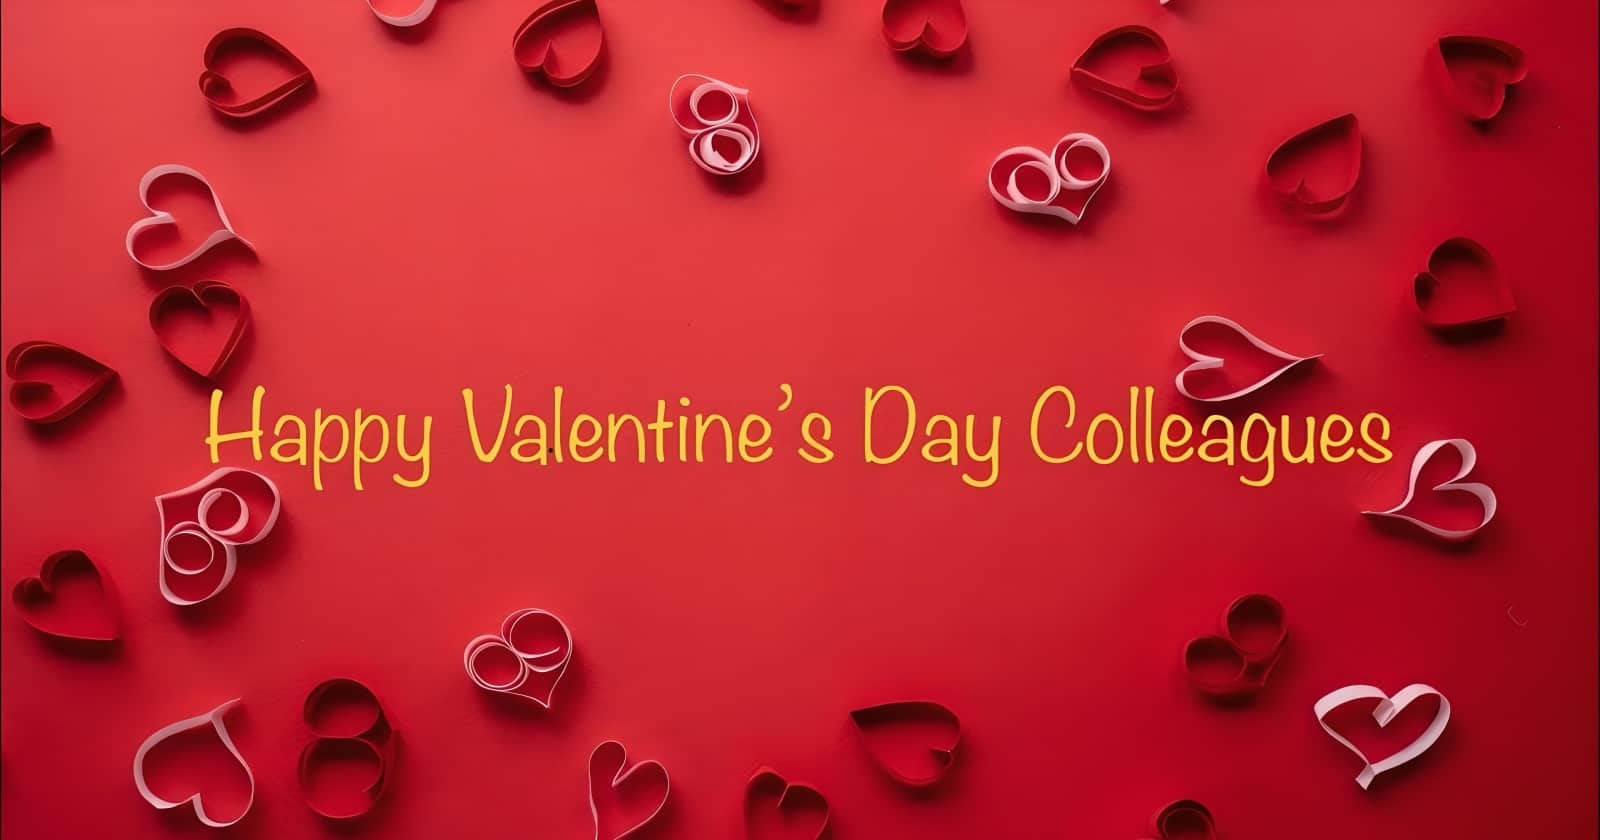 Valentine's Day Messages and Wishes for Friends and Colleagues